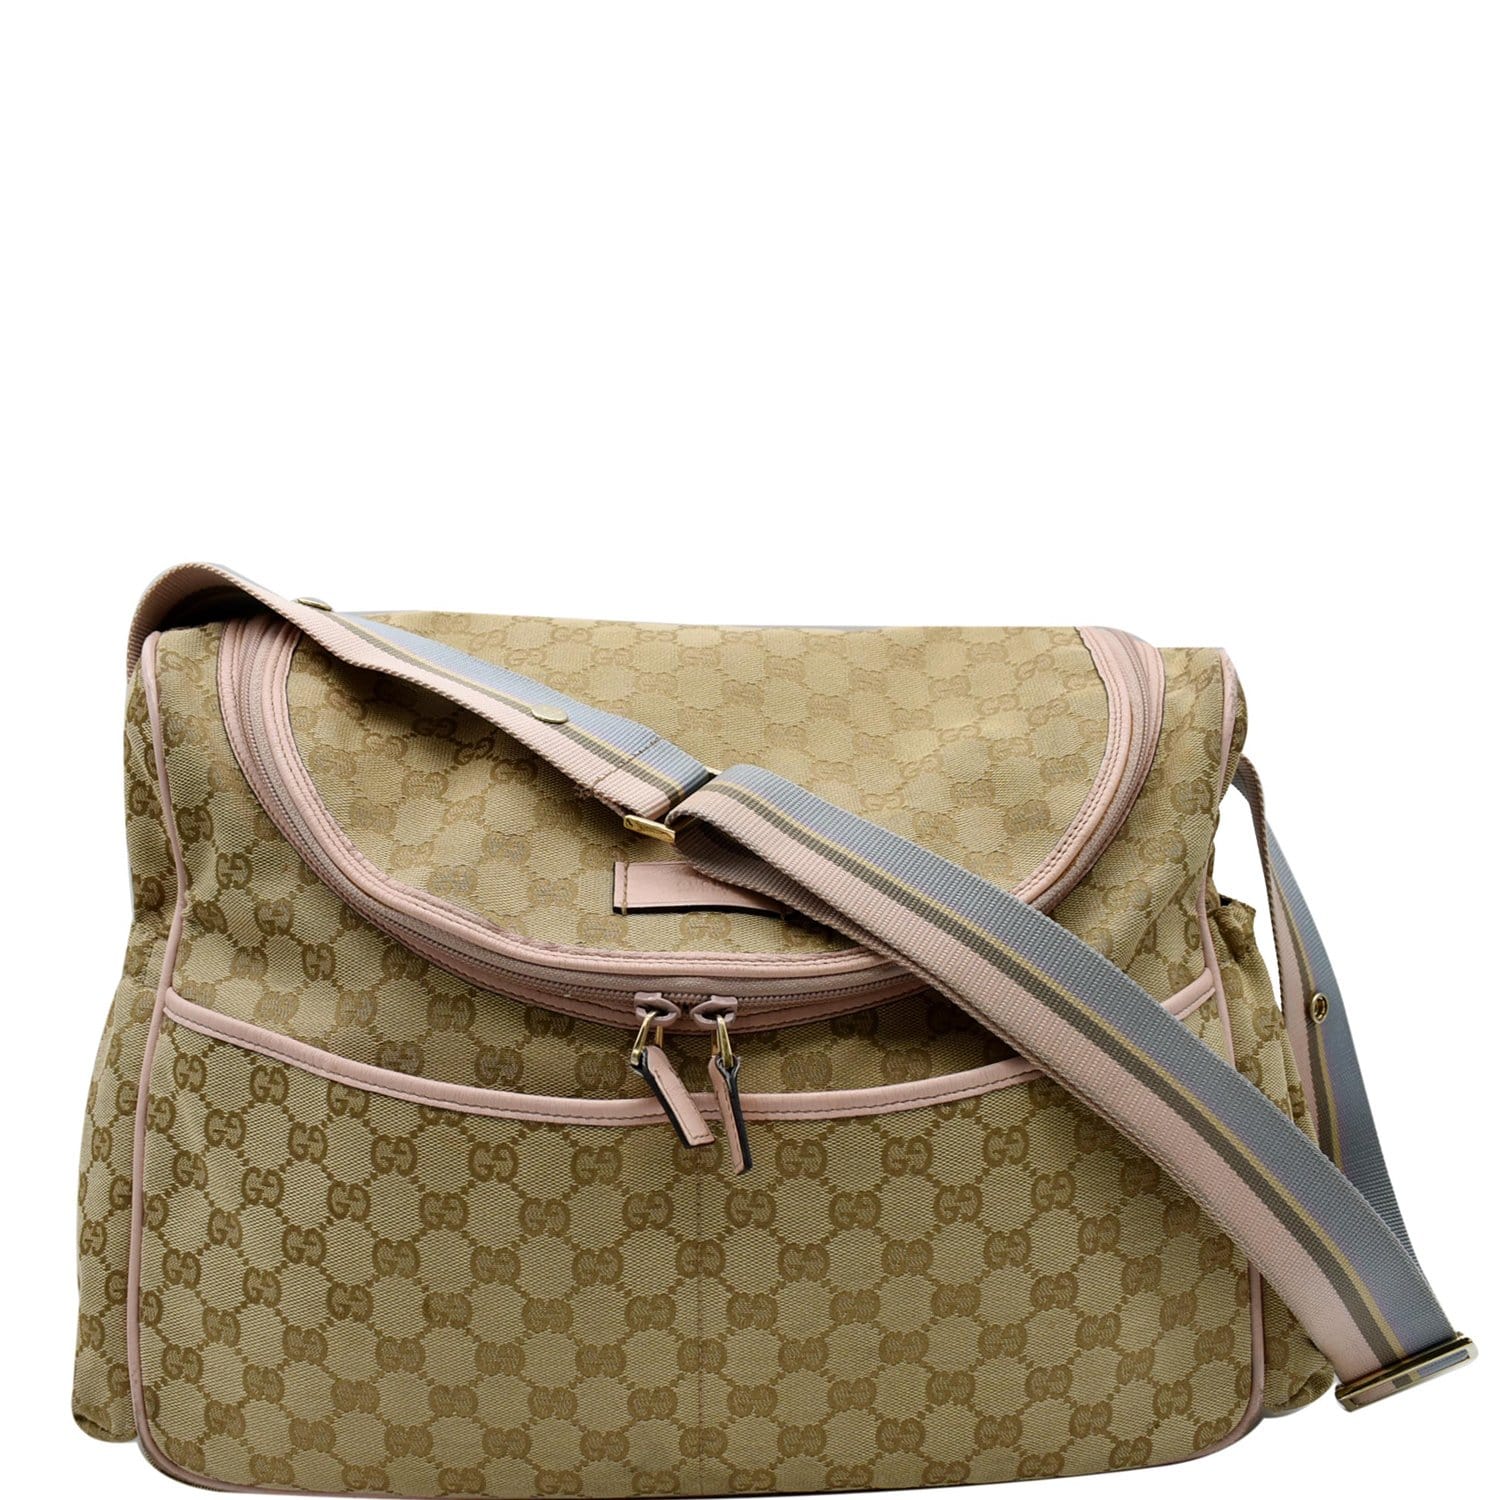 GG Supreme baby changing bag in Beige GG Canvas